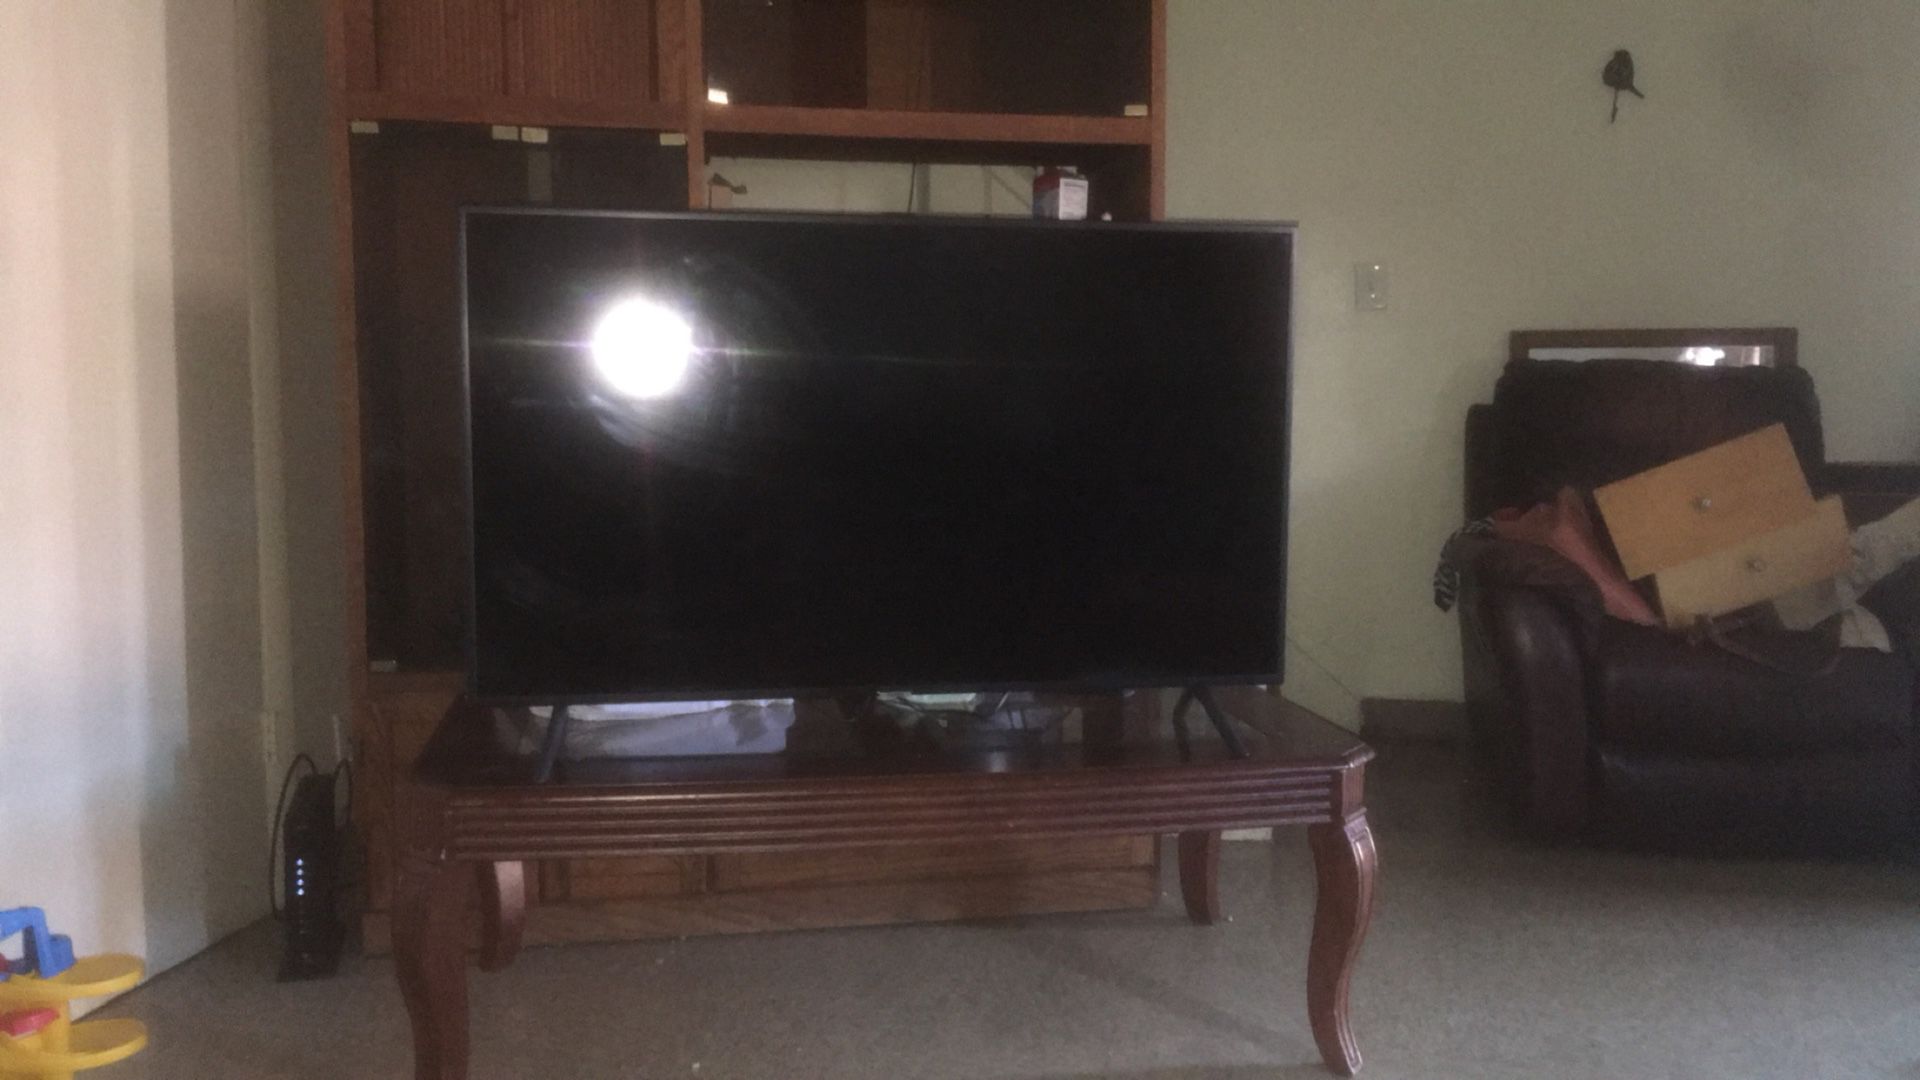 2018 Smart tv in great condition